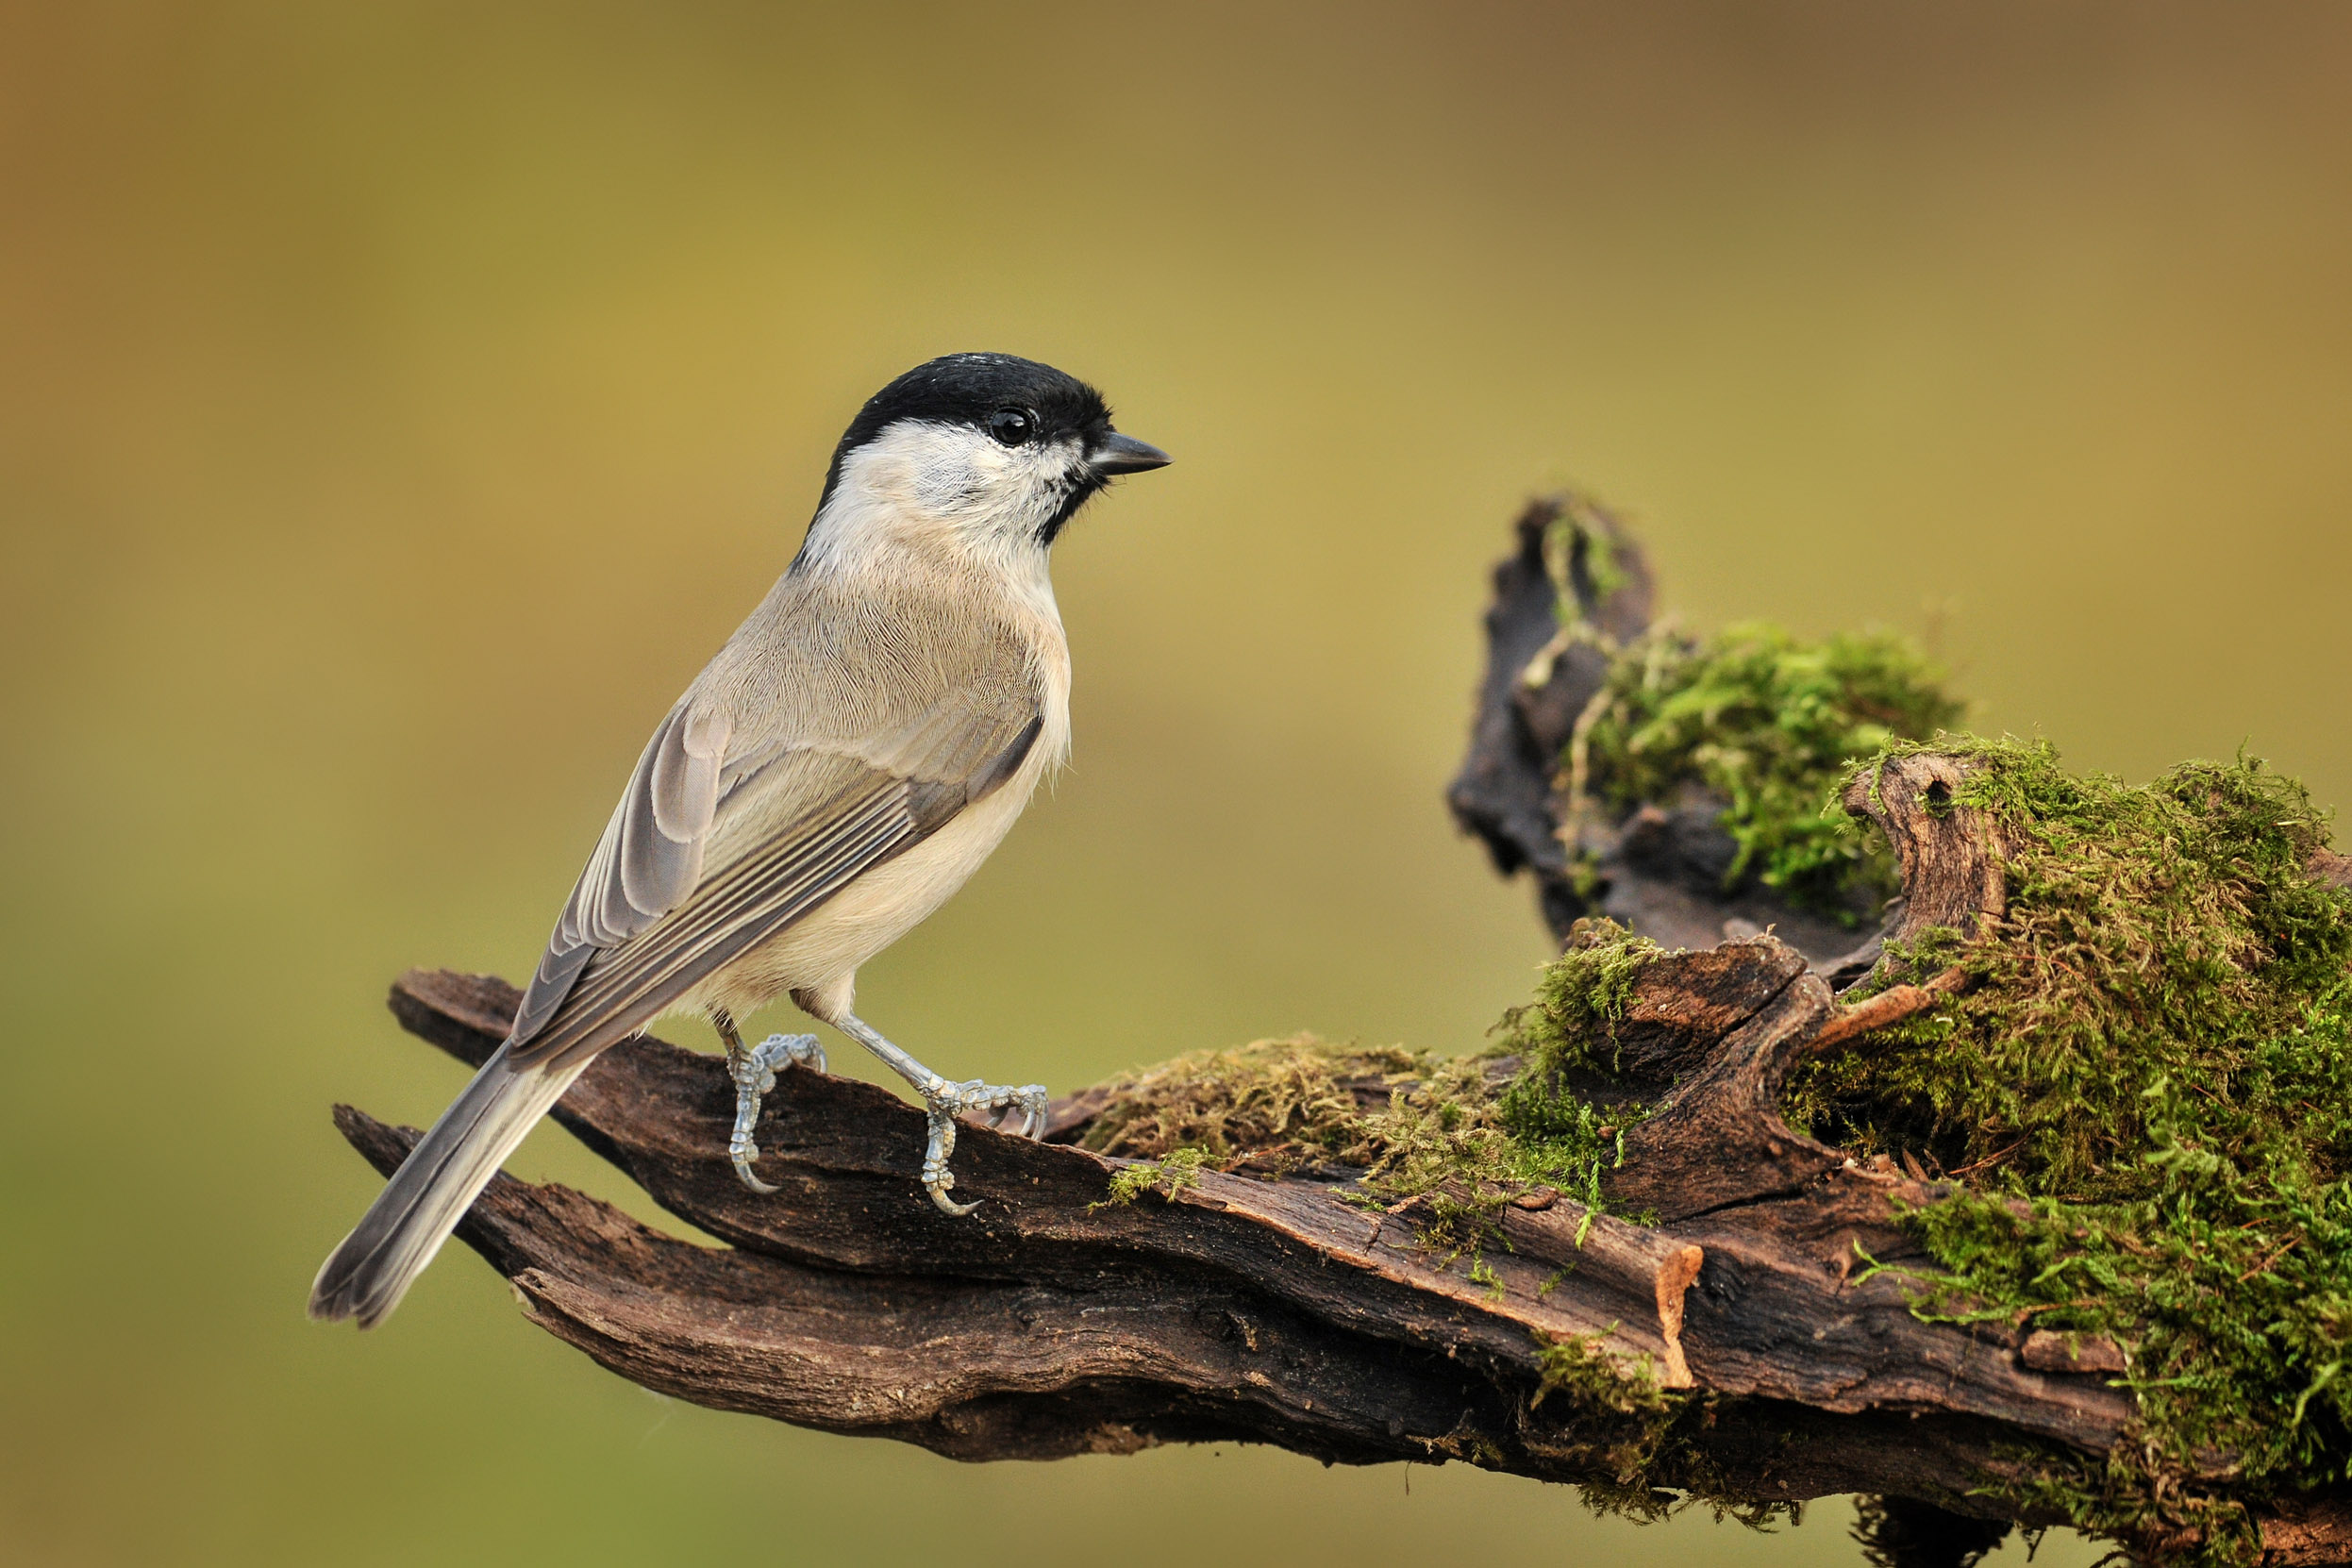 A lone Willow Tit perched on a moss covered log.